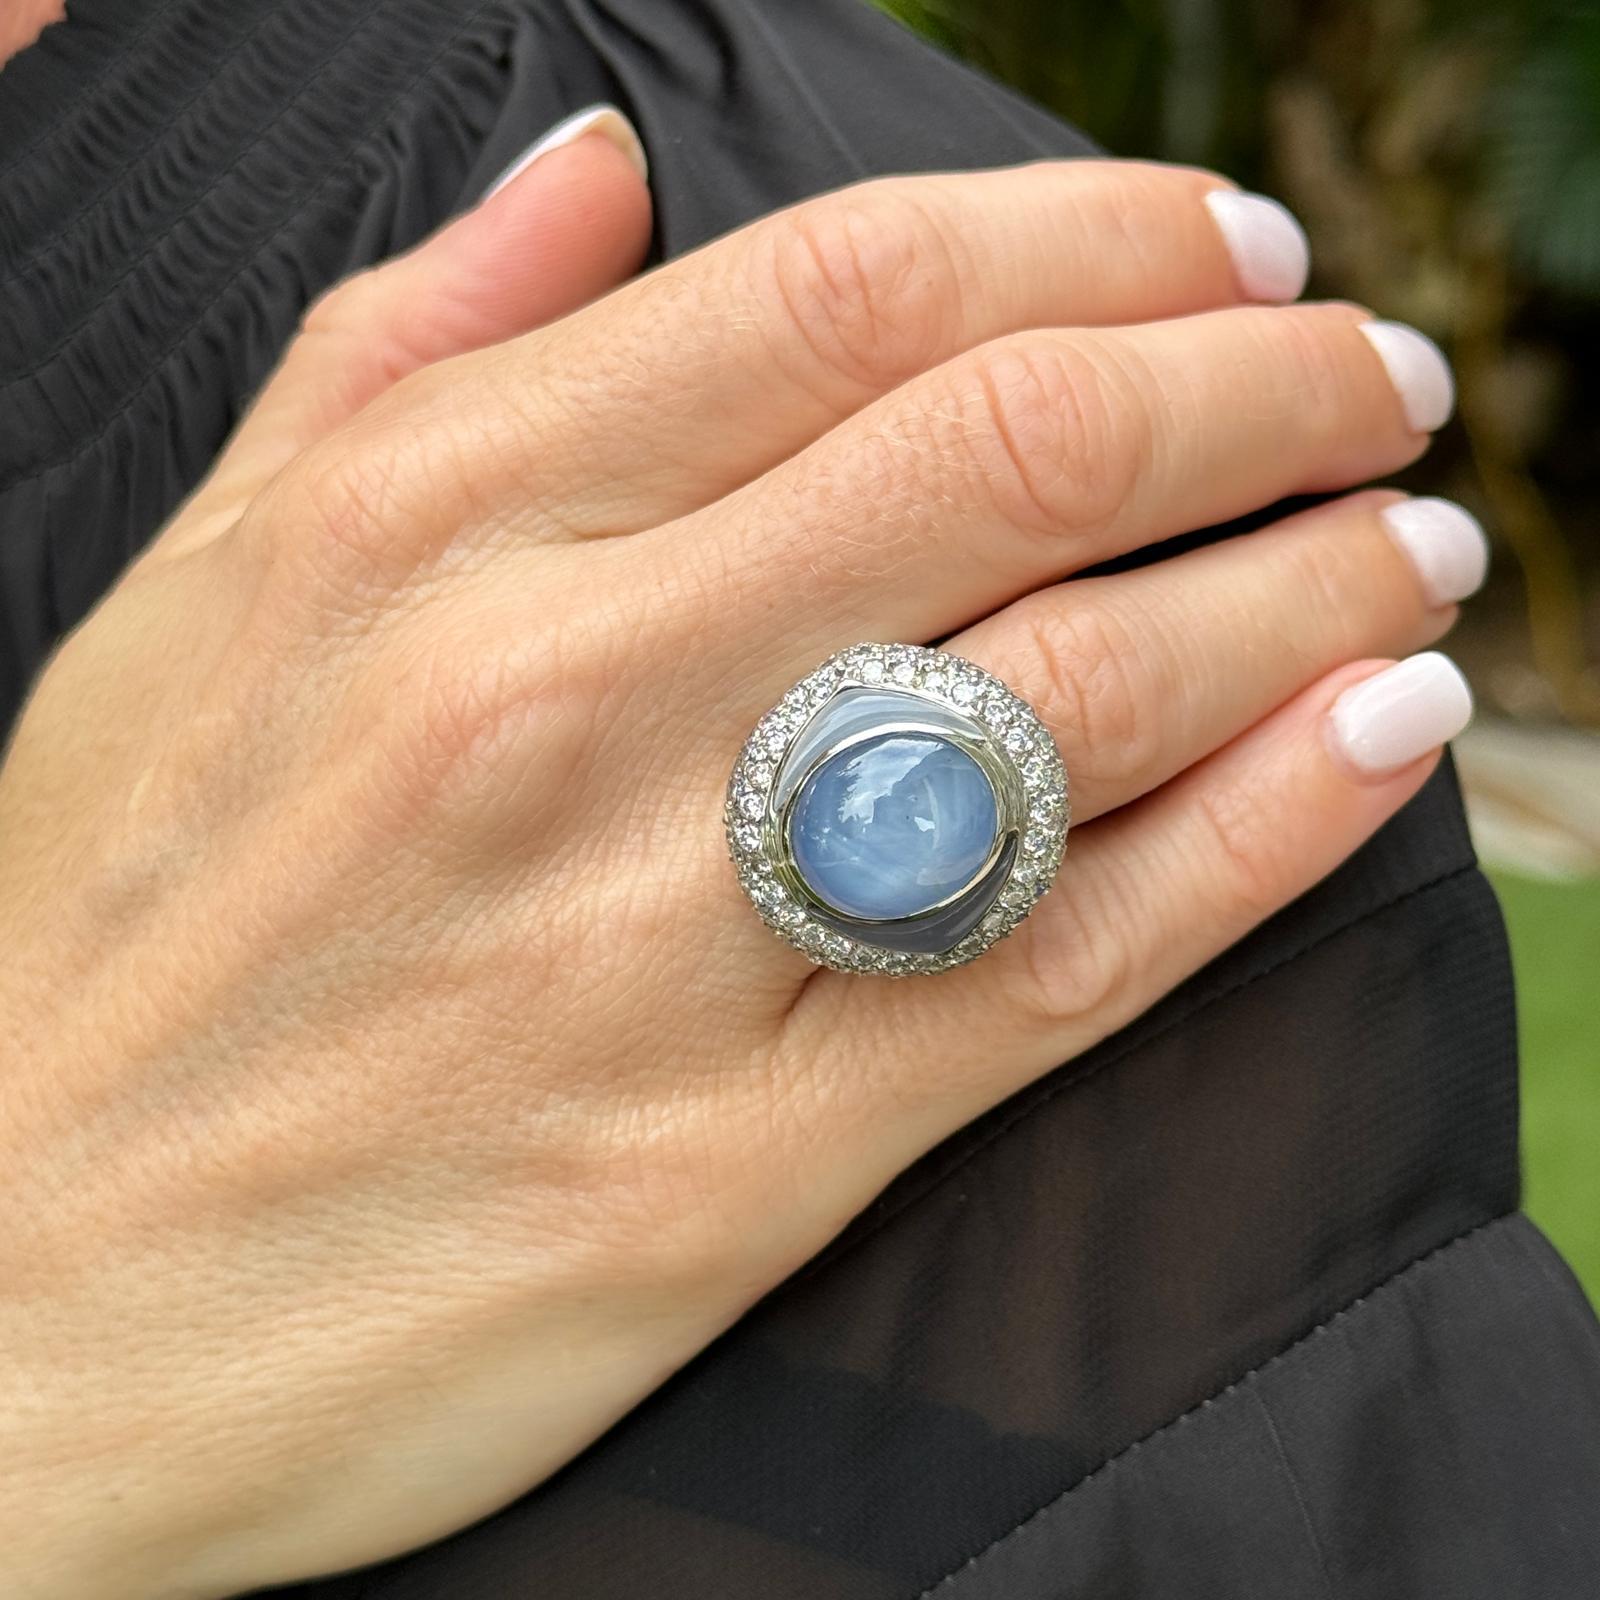 Stunning and unique star sapphire diamond cocktail ring crafted in 18 karat white gold. The ring features a natural no heat blue star sapphire gemstone weighing 20.37 carat certified by the GIA. The sapphire is flanked by two free form blue cabochon